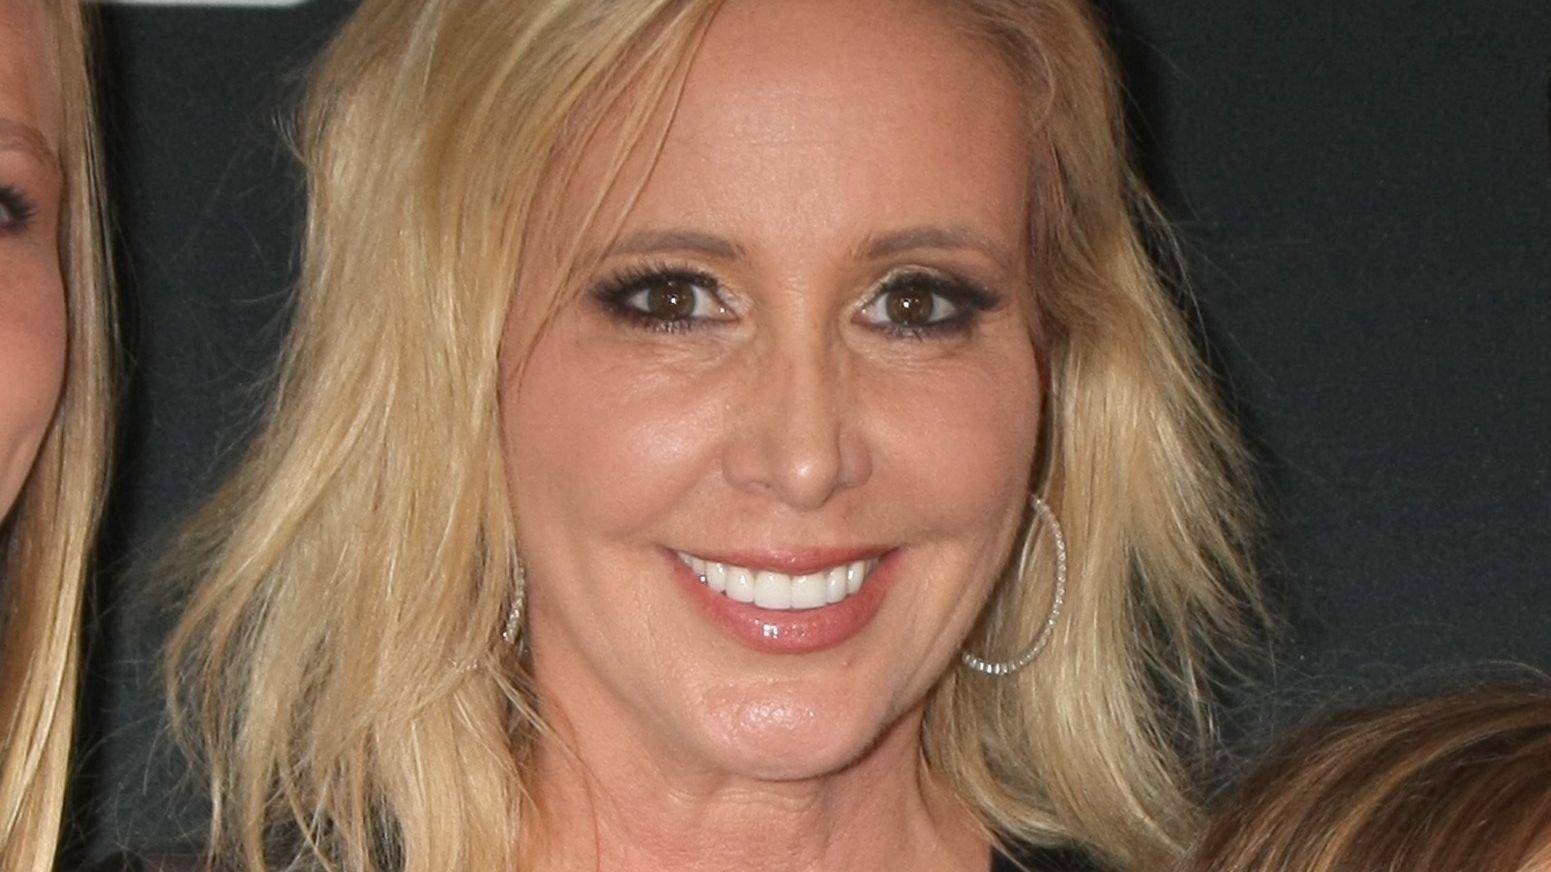 Shannon Beador smiles in close-up